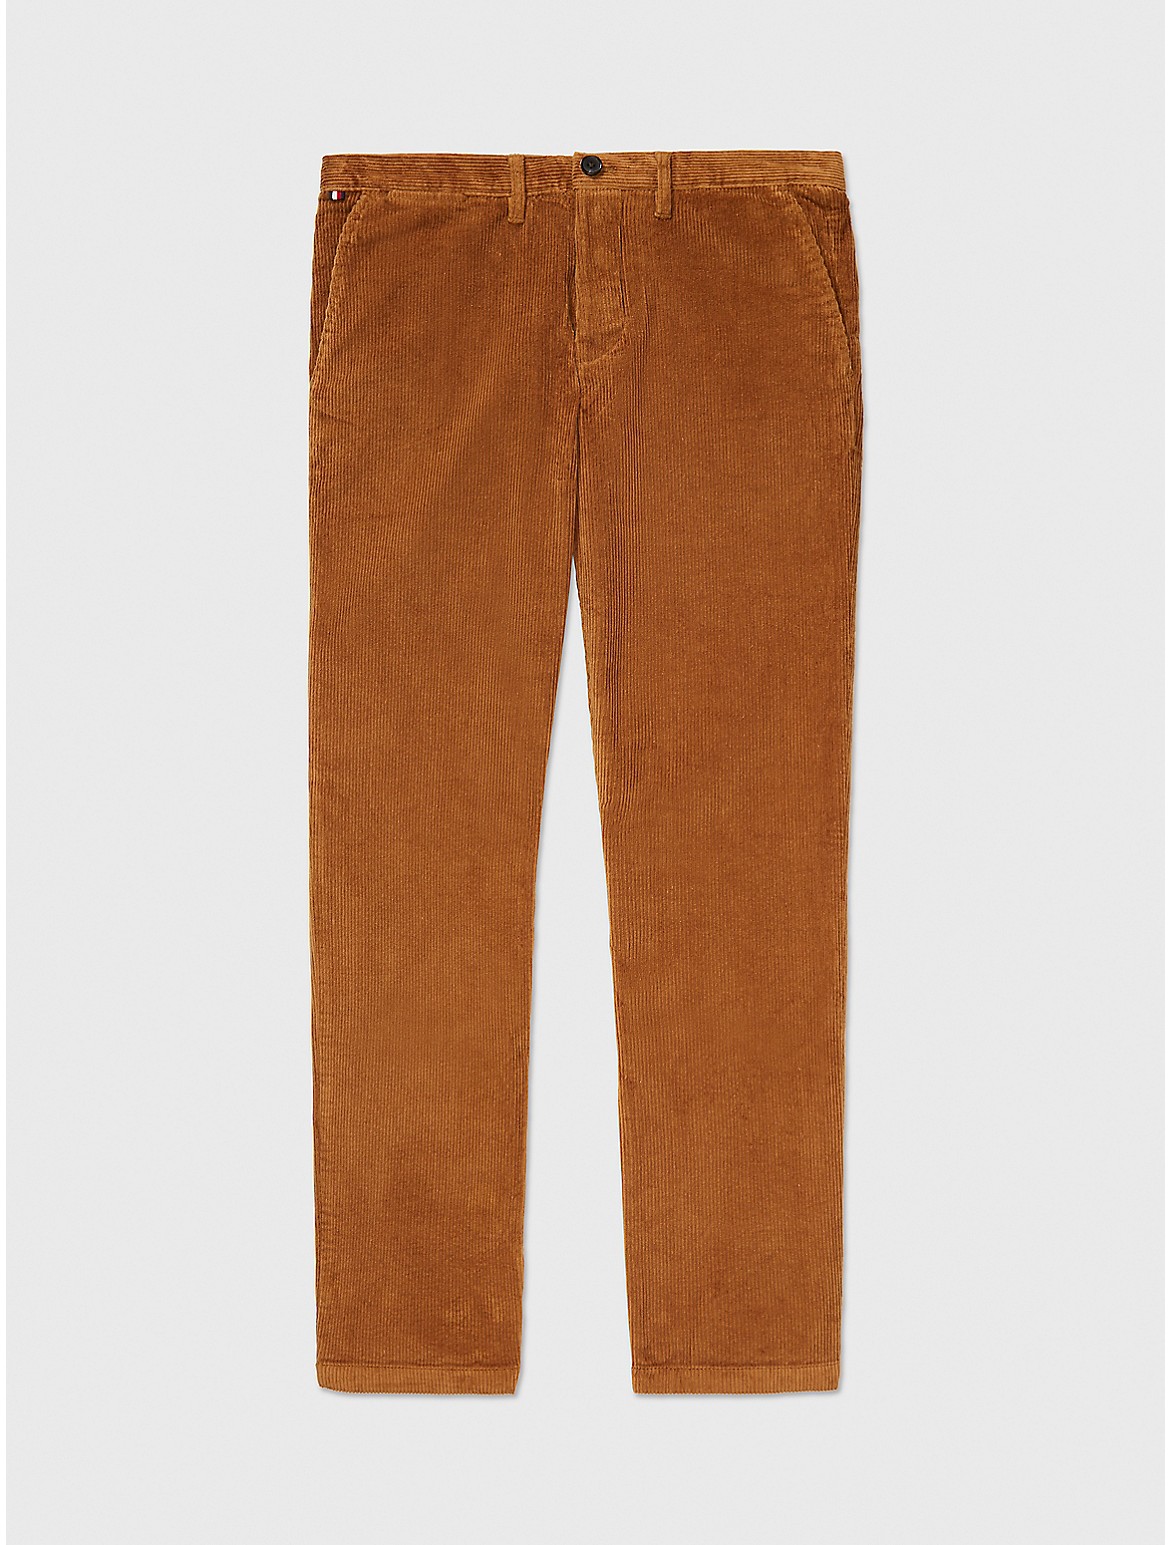 Tommy Hilfiger Men's Straight Fit Corduroy Chino